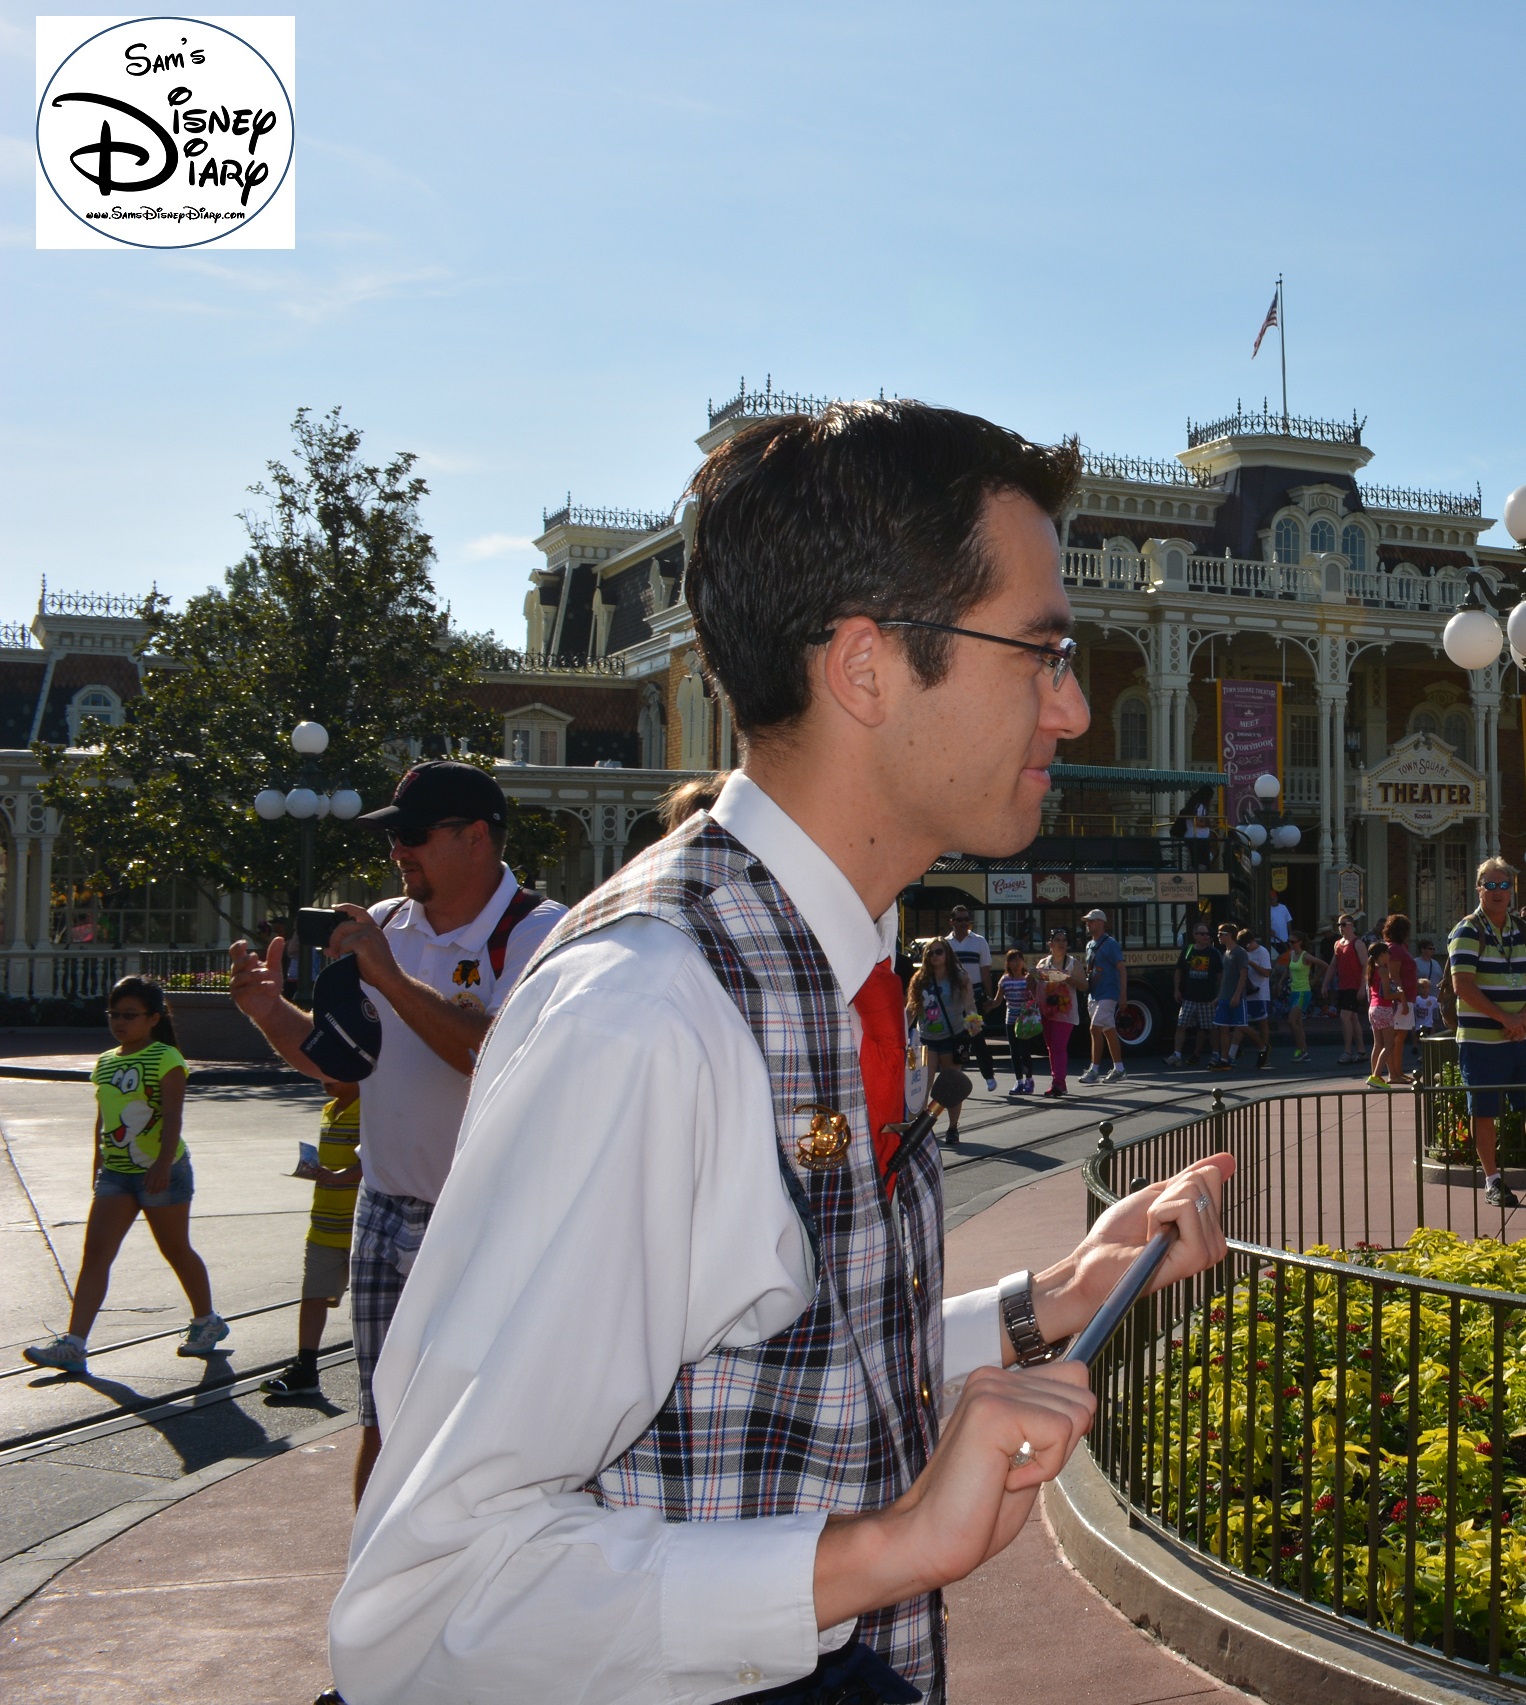 The park was crowded as we started down Main Street USA. James continued to point out interesting facts all the way down main street. 